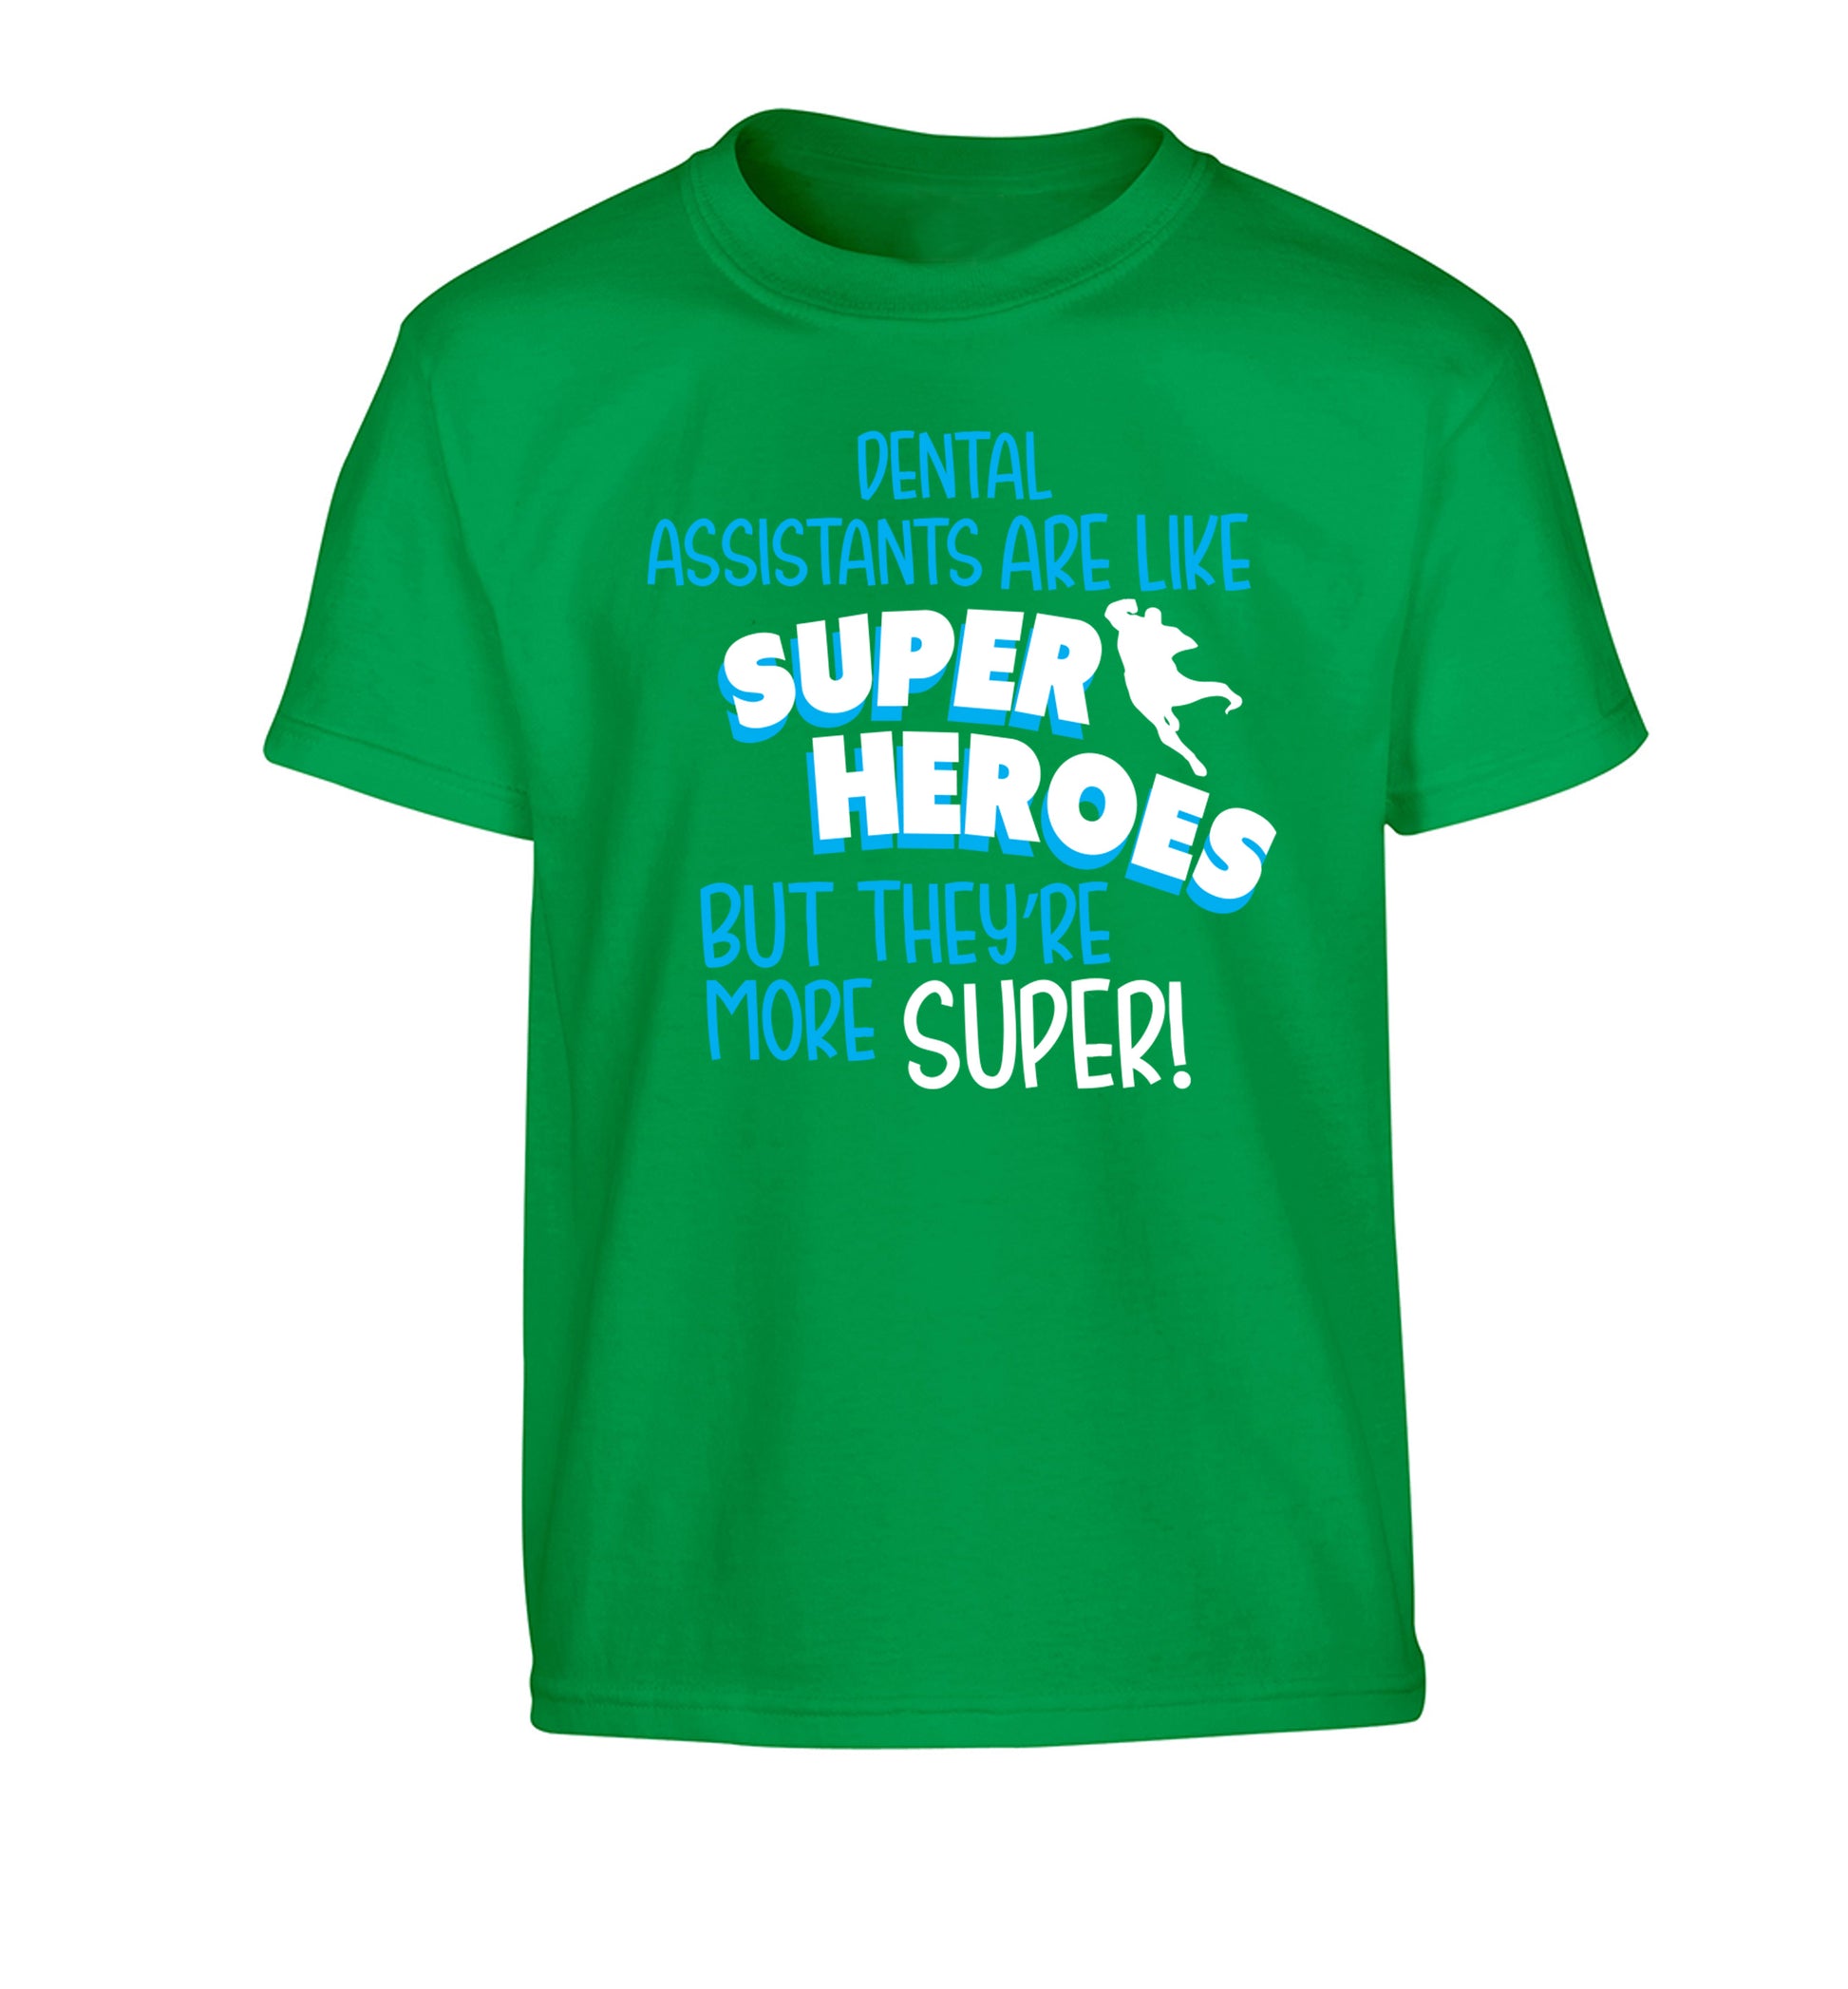 Dental Assistants are like superheros but they're more super Children's green Tshirt 12-13 Years